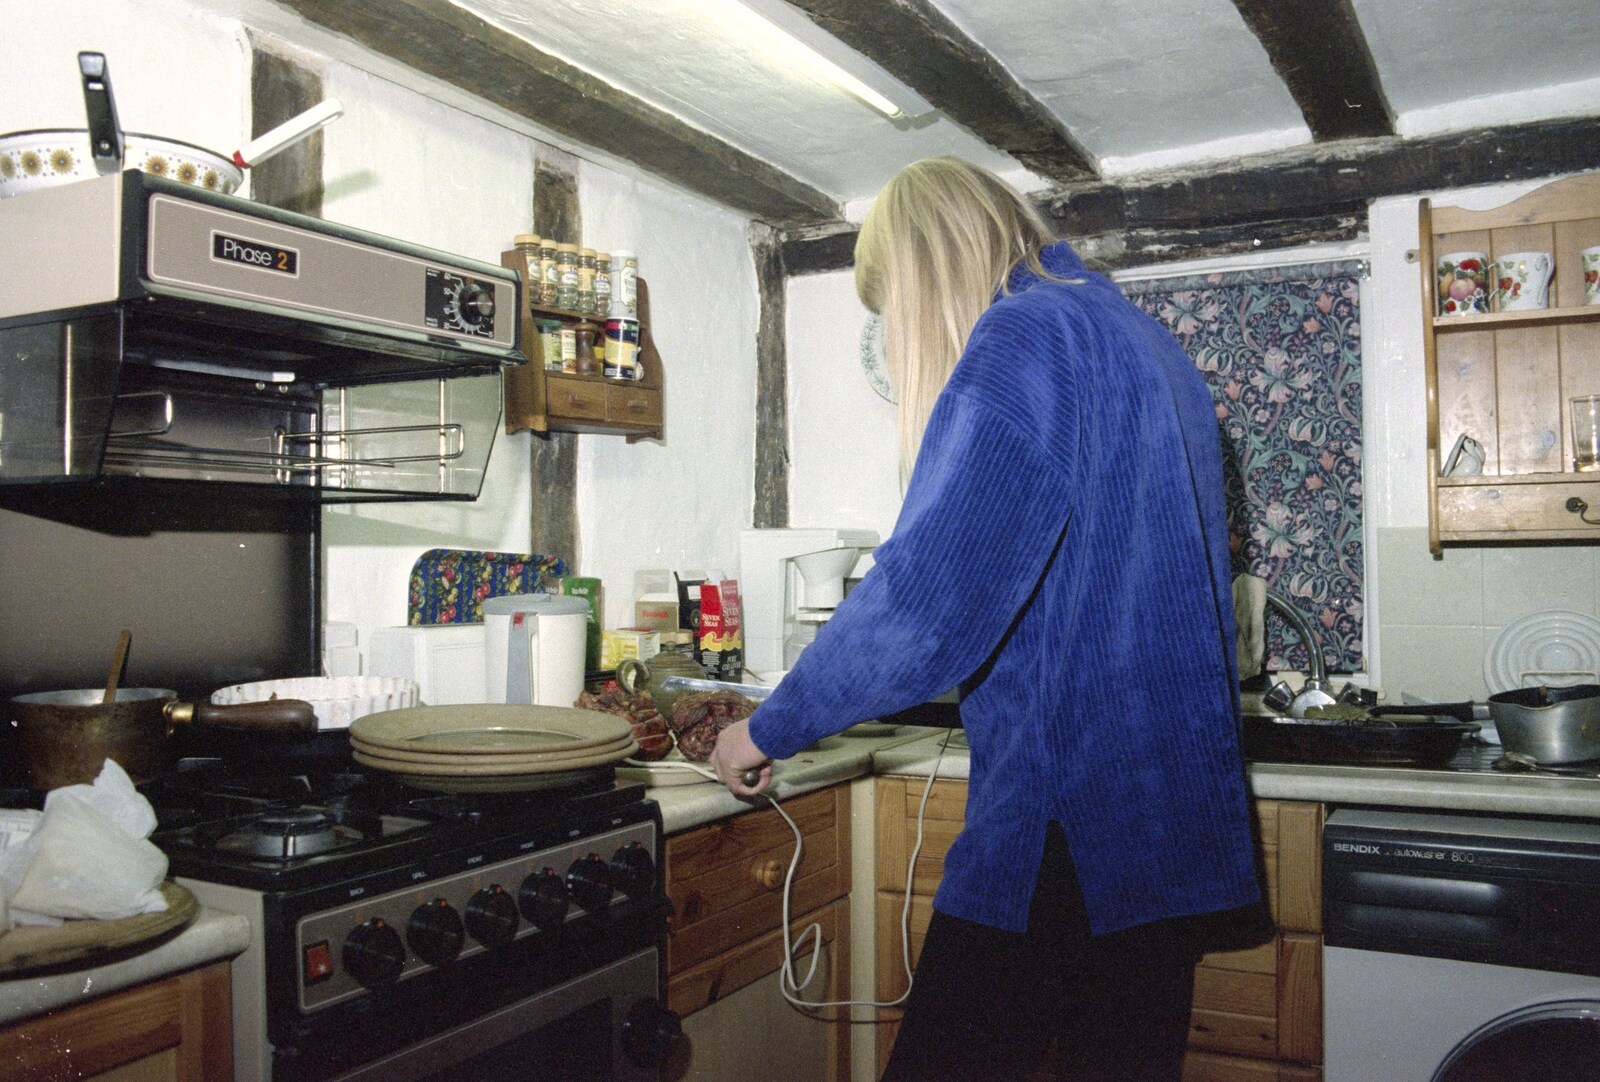 Sue does some hacking with an electric knife from Lunch and Dinner at Mad Sue's, Stuston, Suffolk - 30th March 1995